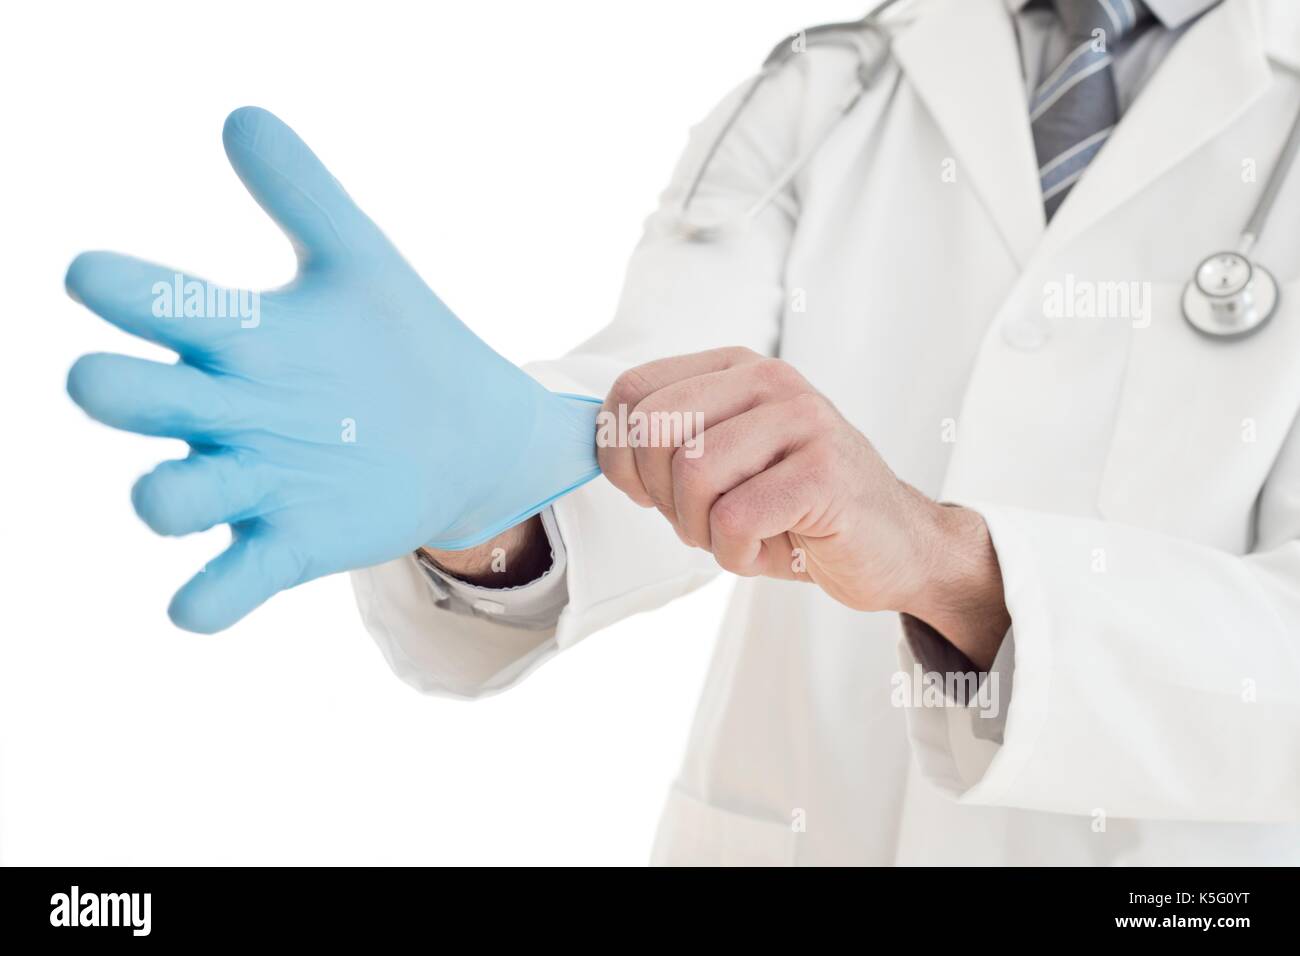 Male doctor putting on blue latex glove, close up. Stock Photo